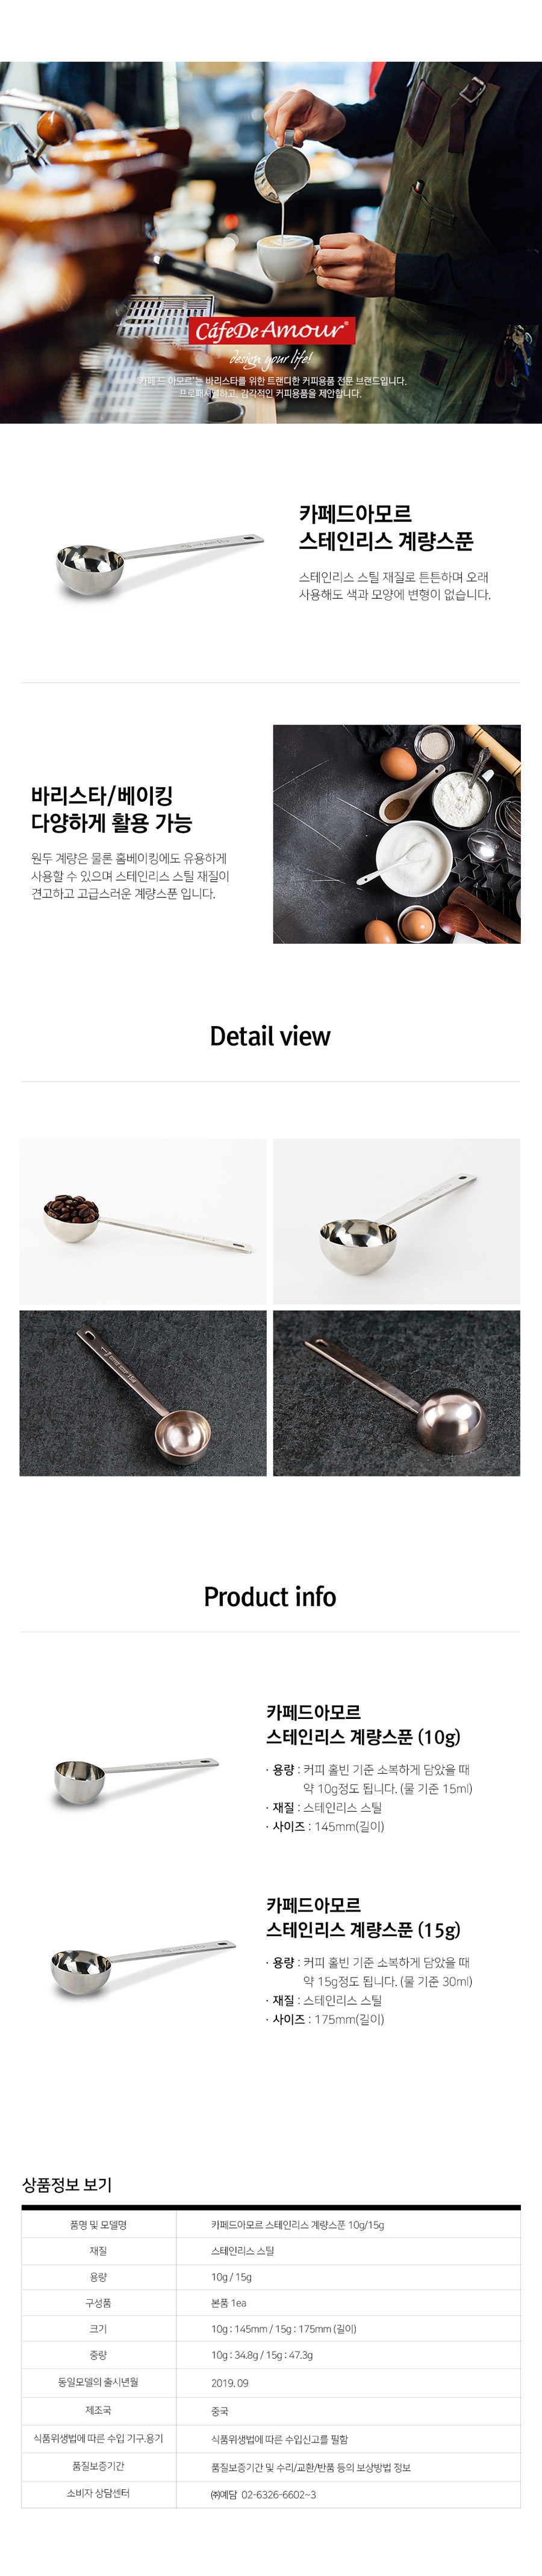 Stainless_Spoon10g